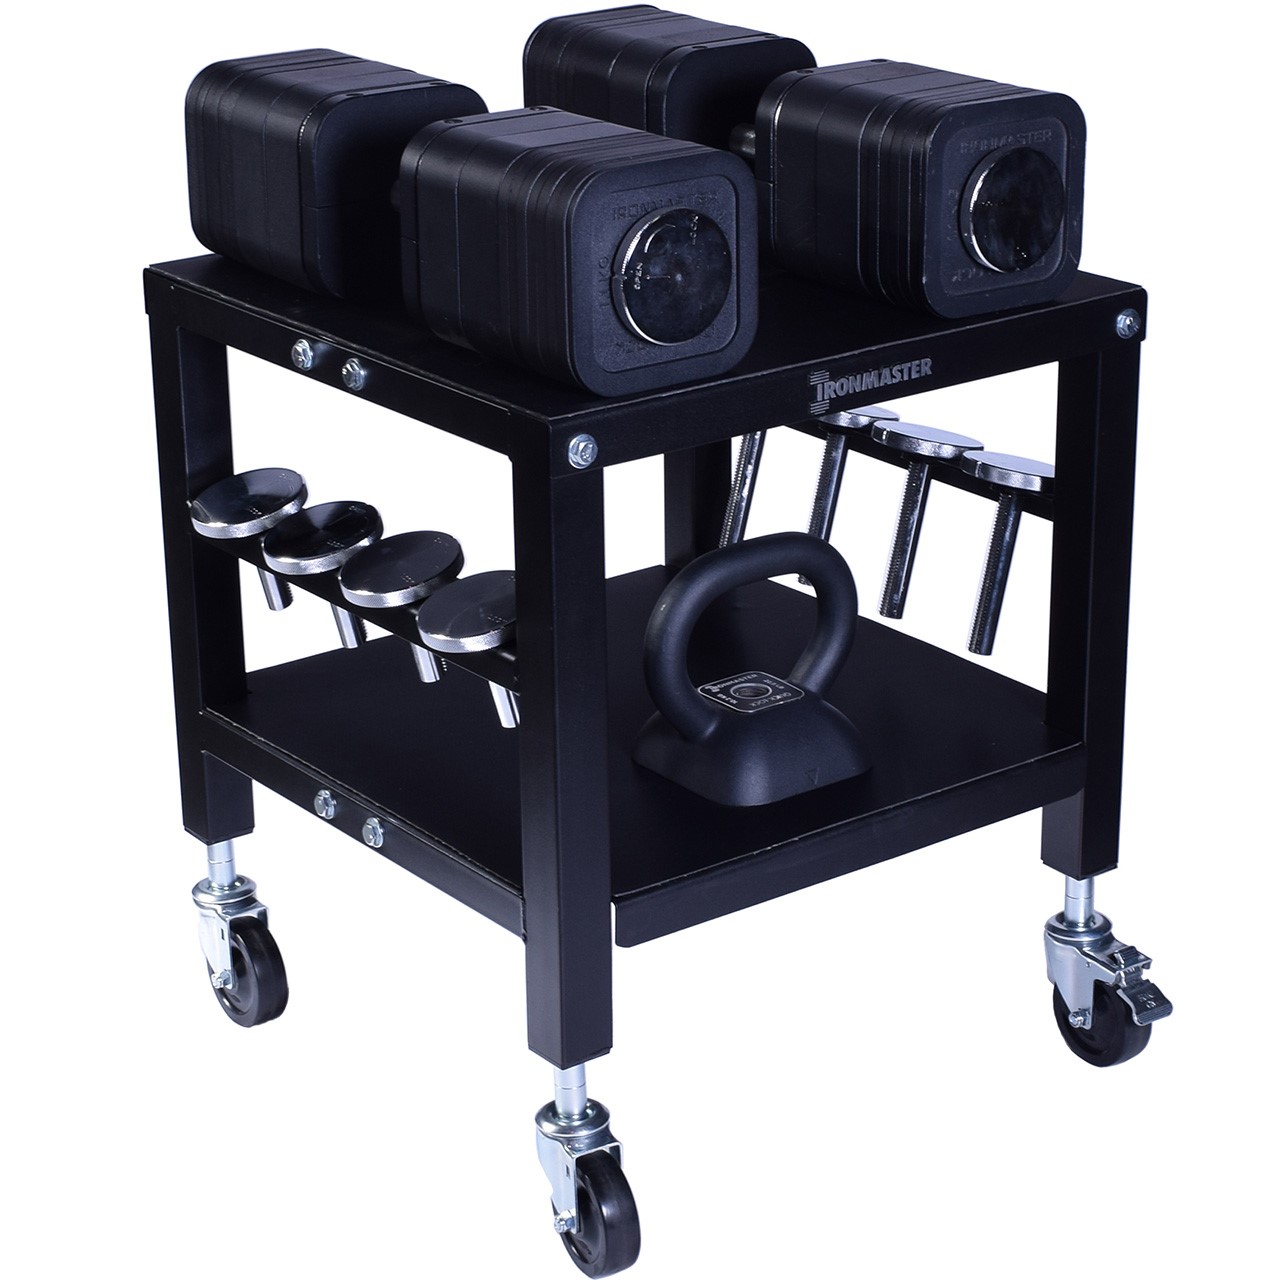 Ironmaster Pro stand for dumbbells